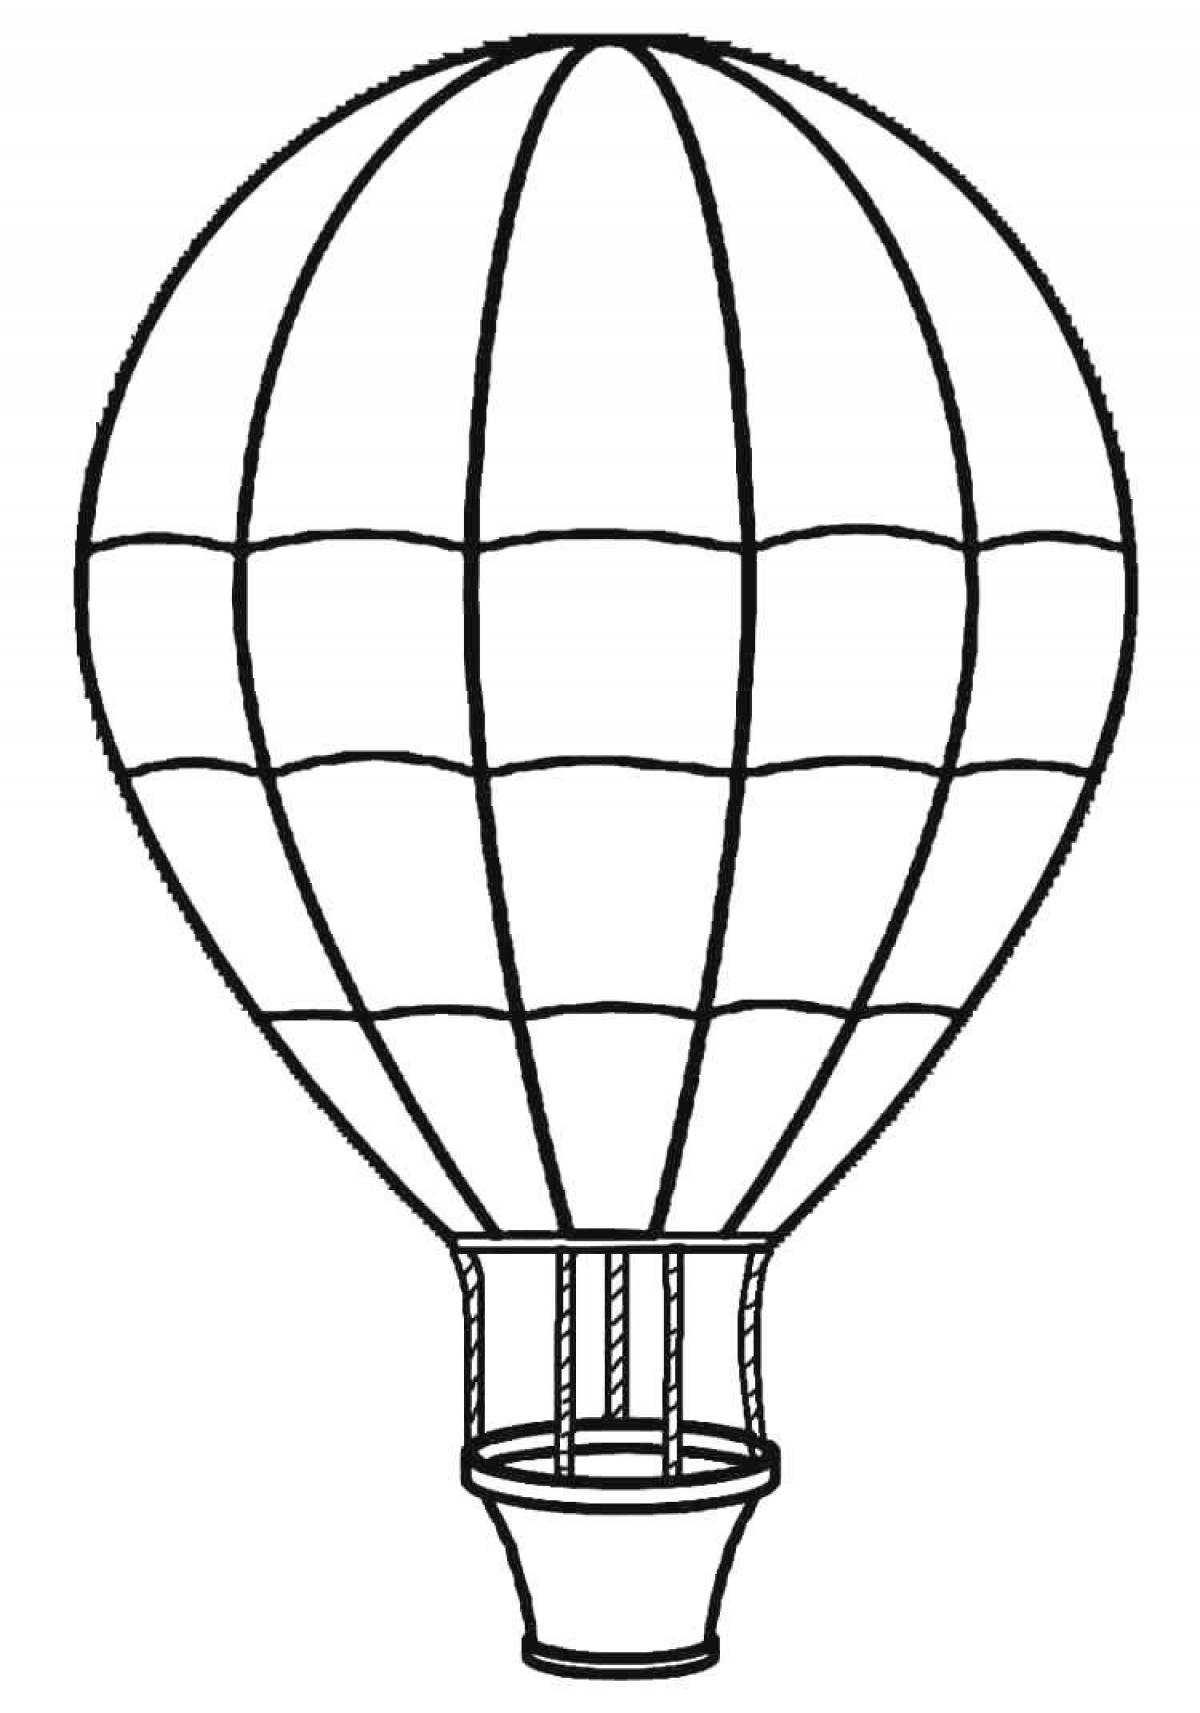 Colored balloon coloring page for kids